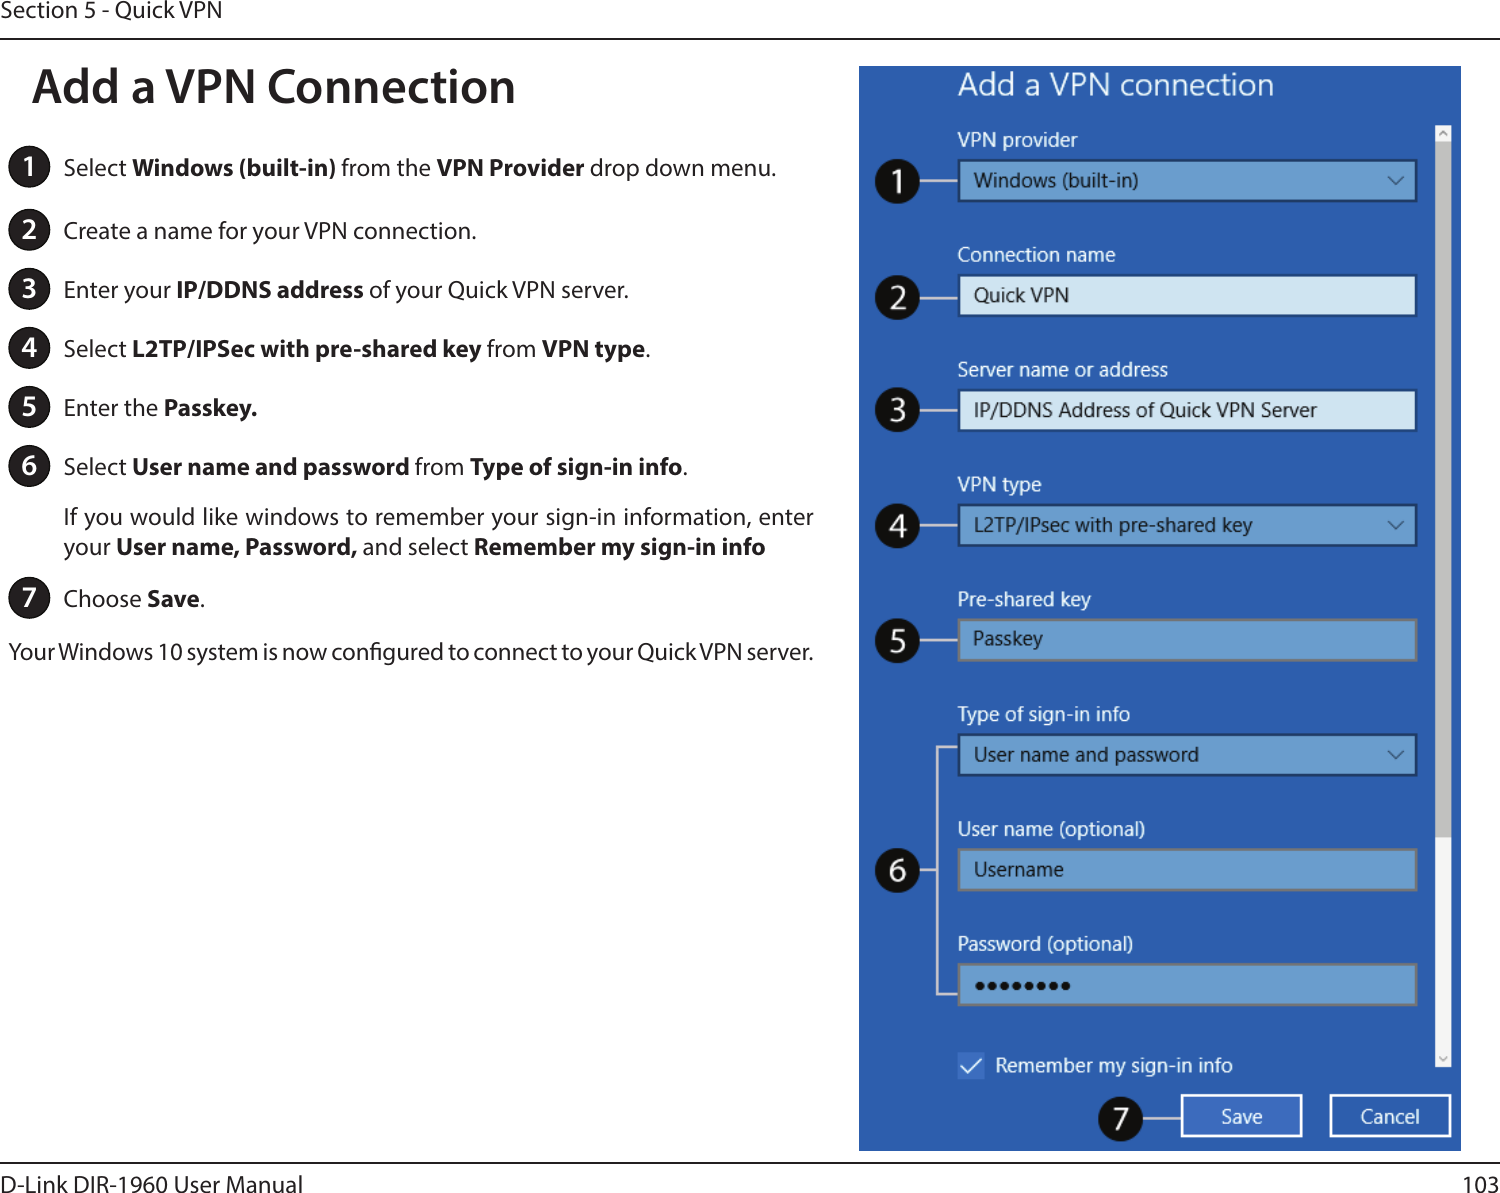 103D-Link DIR-1960 User ManualSection 5 - Quick VPN1Select Windows (built-in) from the VPN Provider drop down menu.2Create a name for your VPN connection.3Enter your IP/DDNS address of your Quick VPN server.4Select L2TP/IPSec with pre-shared key from VPN type.5Enter the Passkey.6Select User name and password from Type of sign-in info.If you would like windows to remember your sign-in information, enter your User name, Password, and select Remember my sign-in info7Choose Save.Your Windows 10 system is now congured to connect to your Quick VPN server.Add a VPN Connection